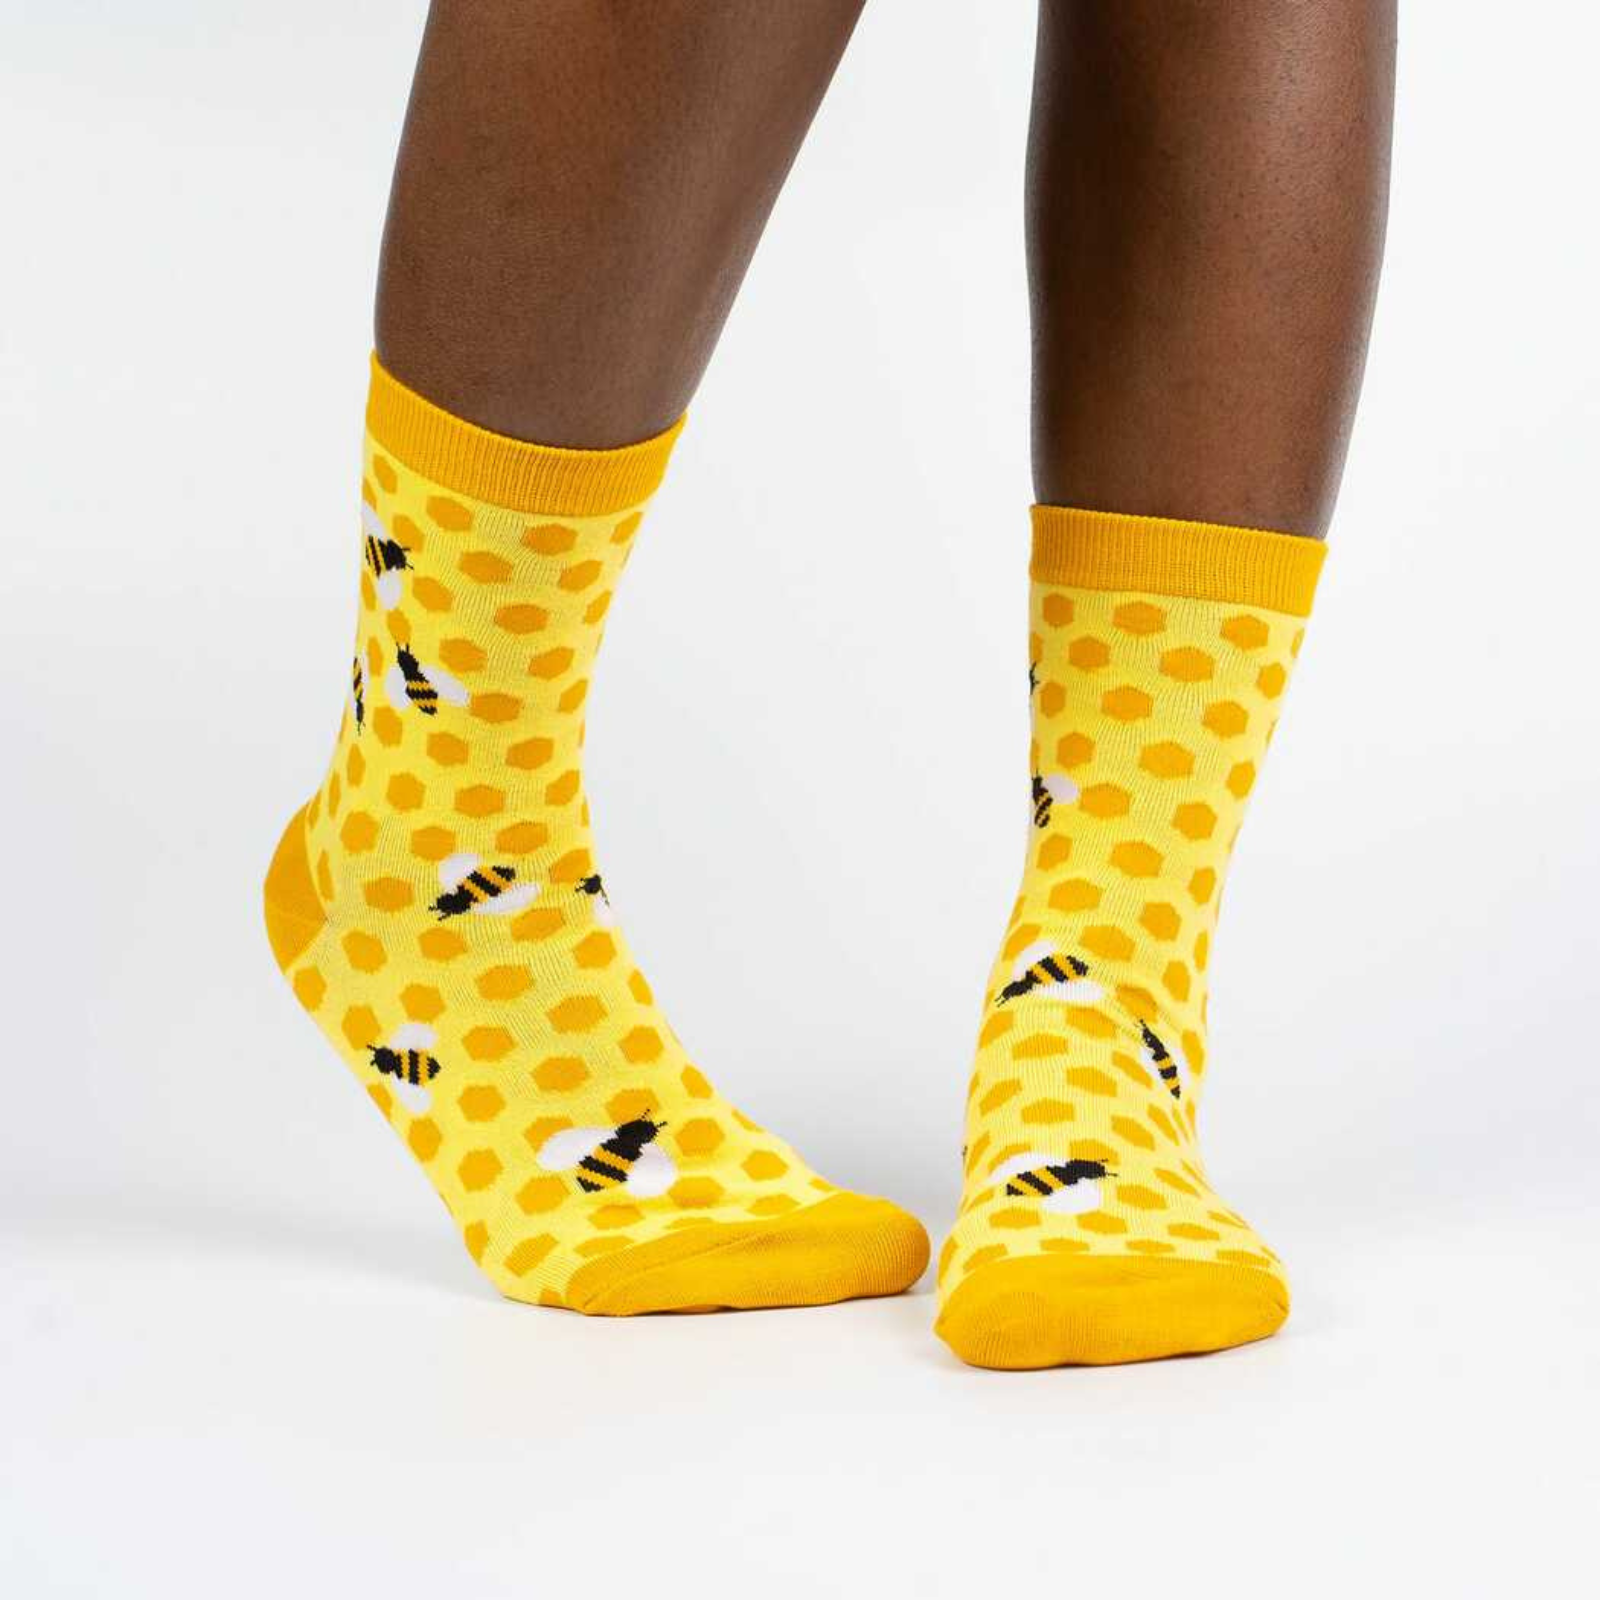 Sock It To Me women's yellow sock Bees Knees featuring honeycomb and bees all over on model from front